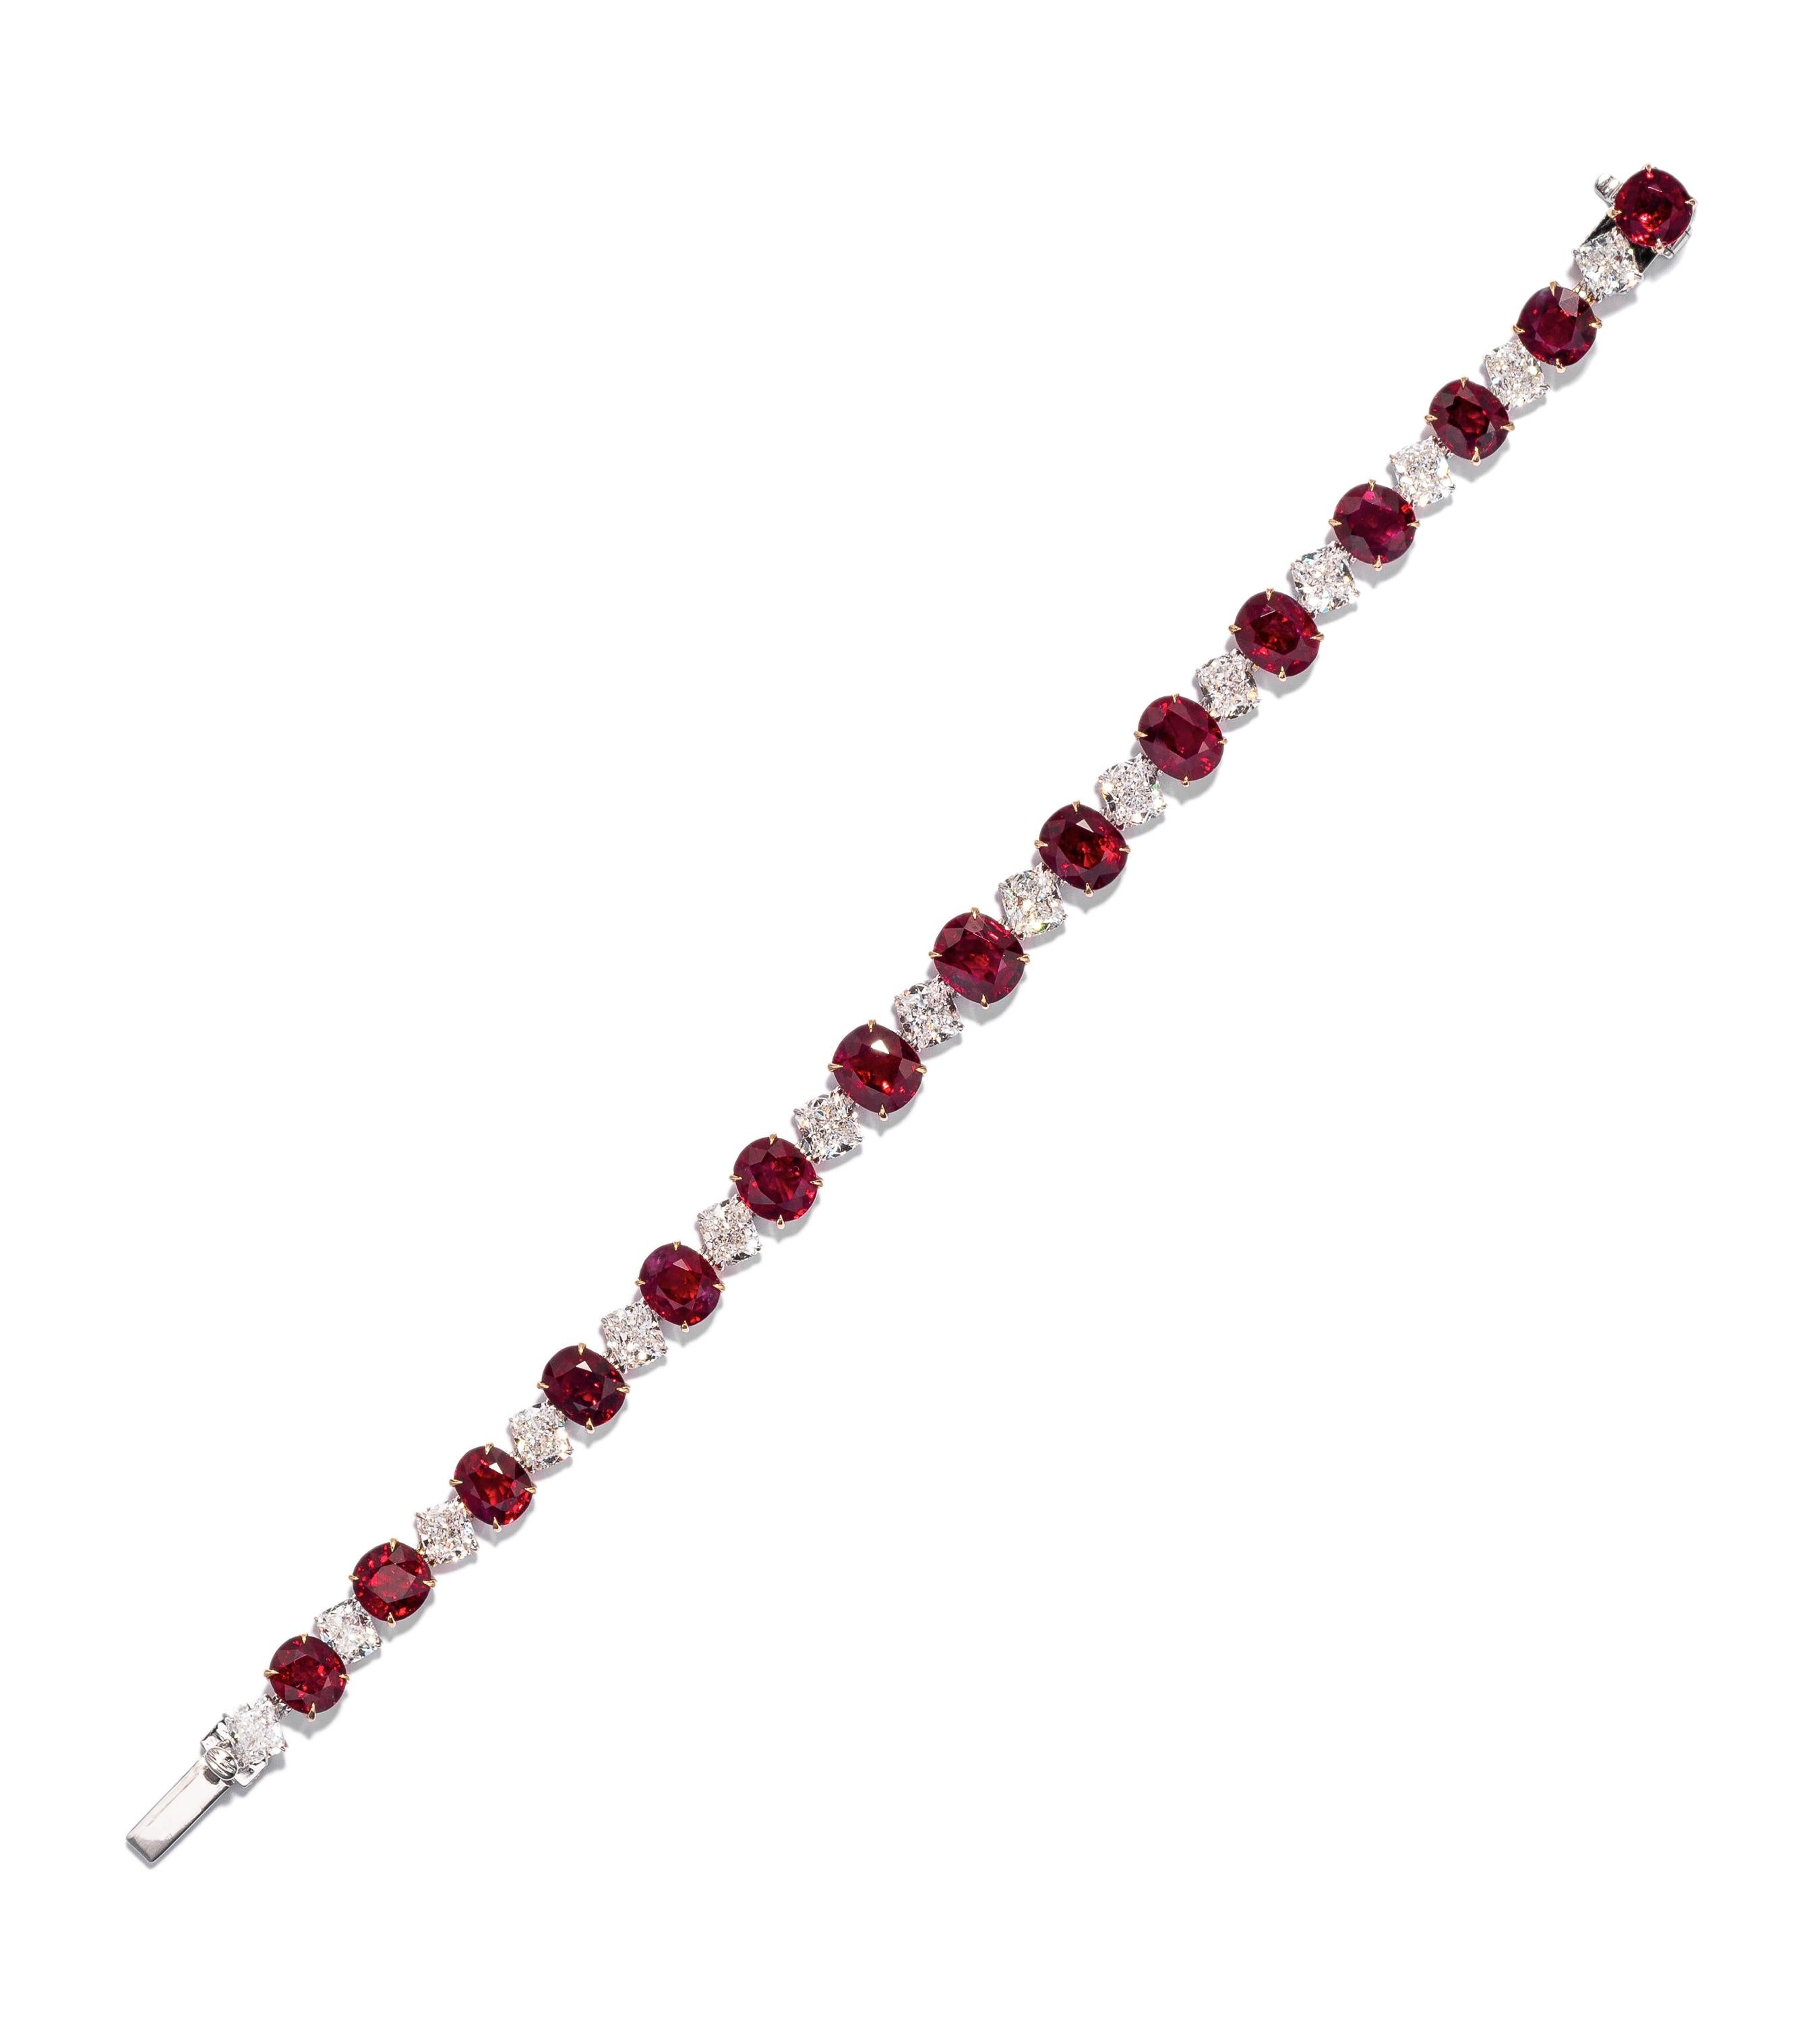 This piece is available for custom order only. 

This exquisite bracelet is a true collector's item and masterpiece given the rarity of Burmese Pigeon's Blood Rubies. The bracelet features 18.88cts of crimson Burmese Pigeon's Blood Rubies (all no